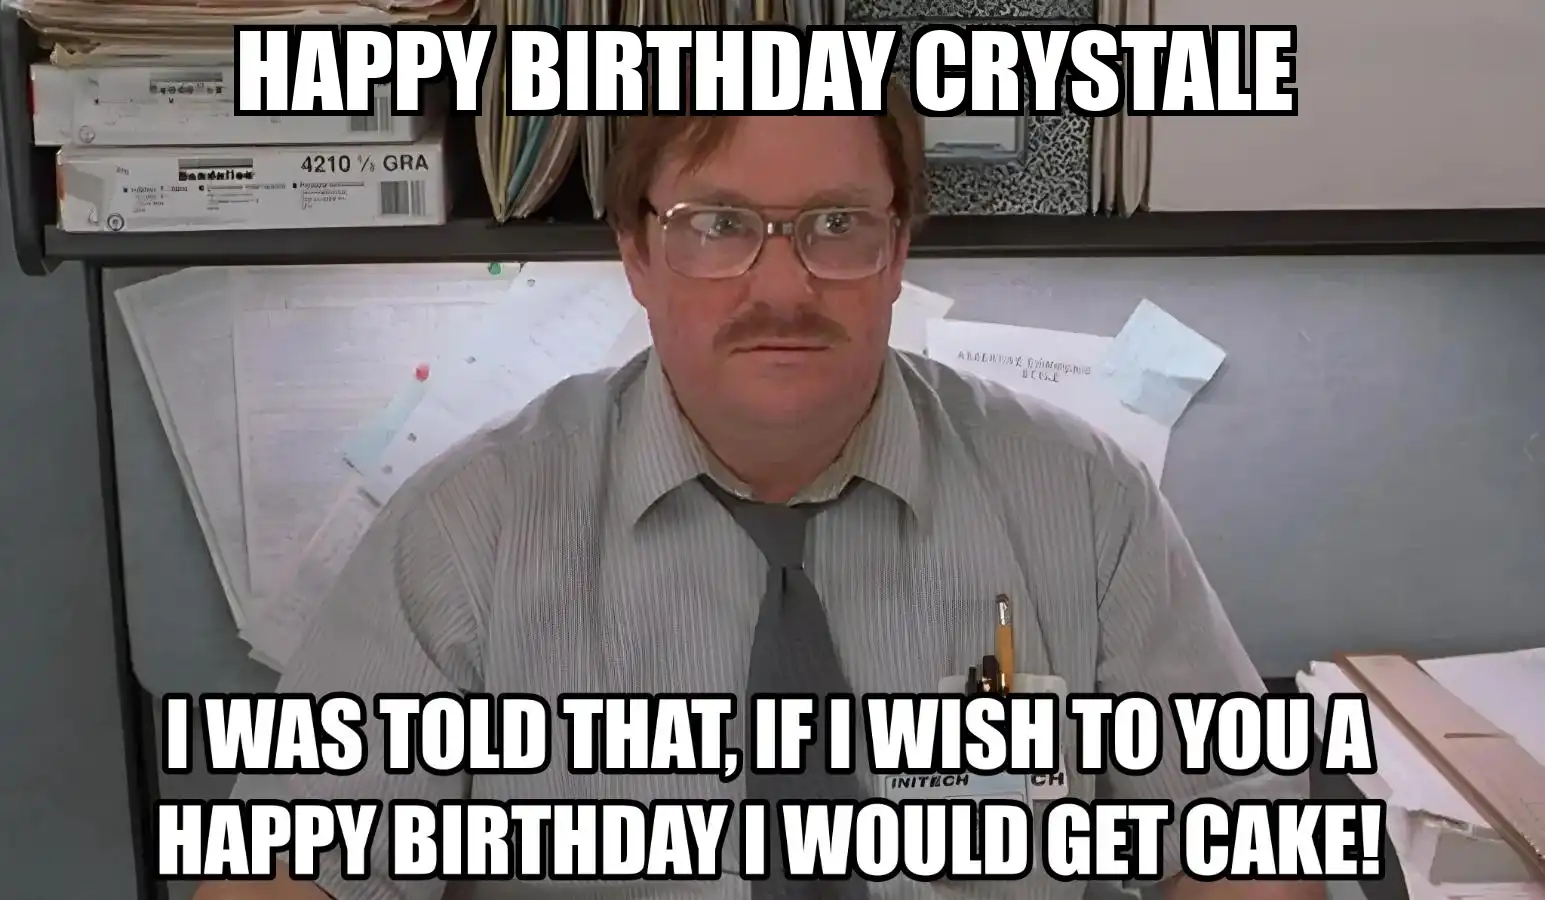 Happy Birthday Crystale I Would Get A Cake Meme